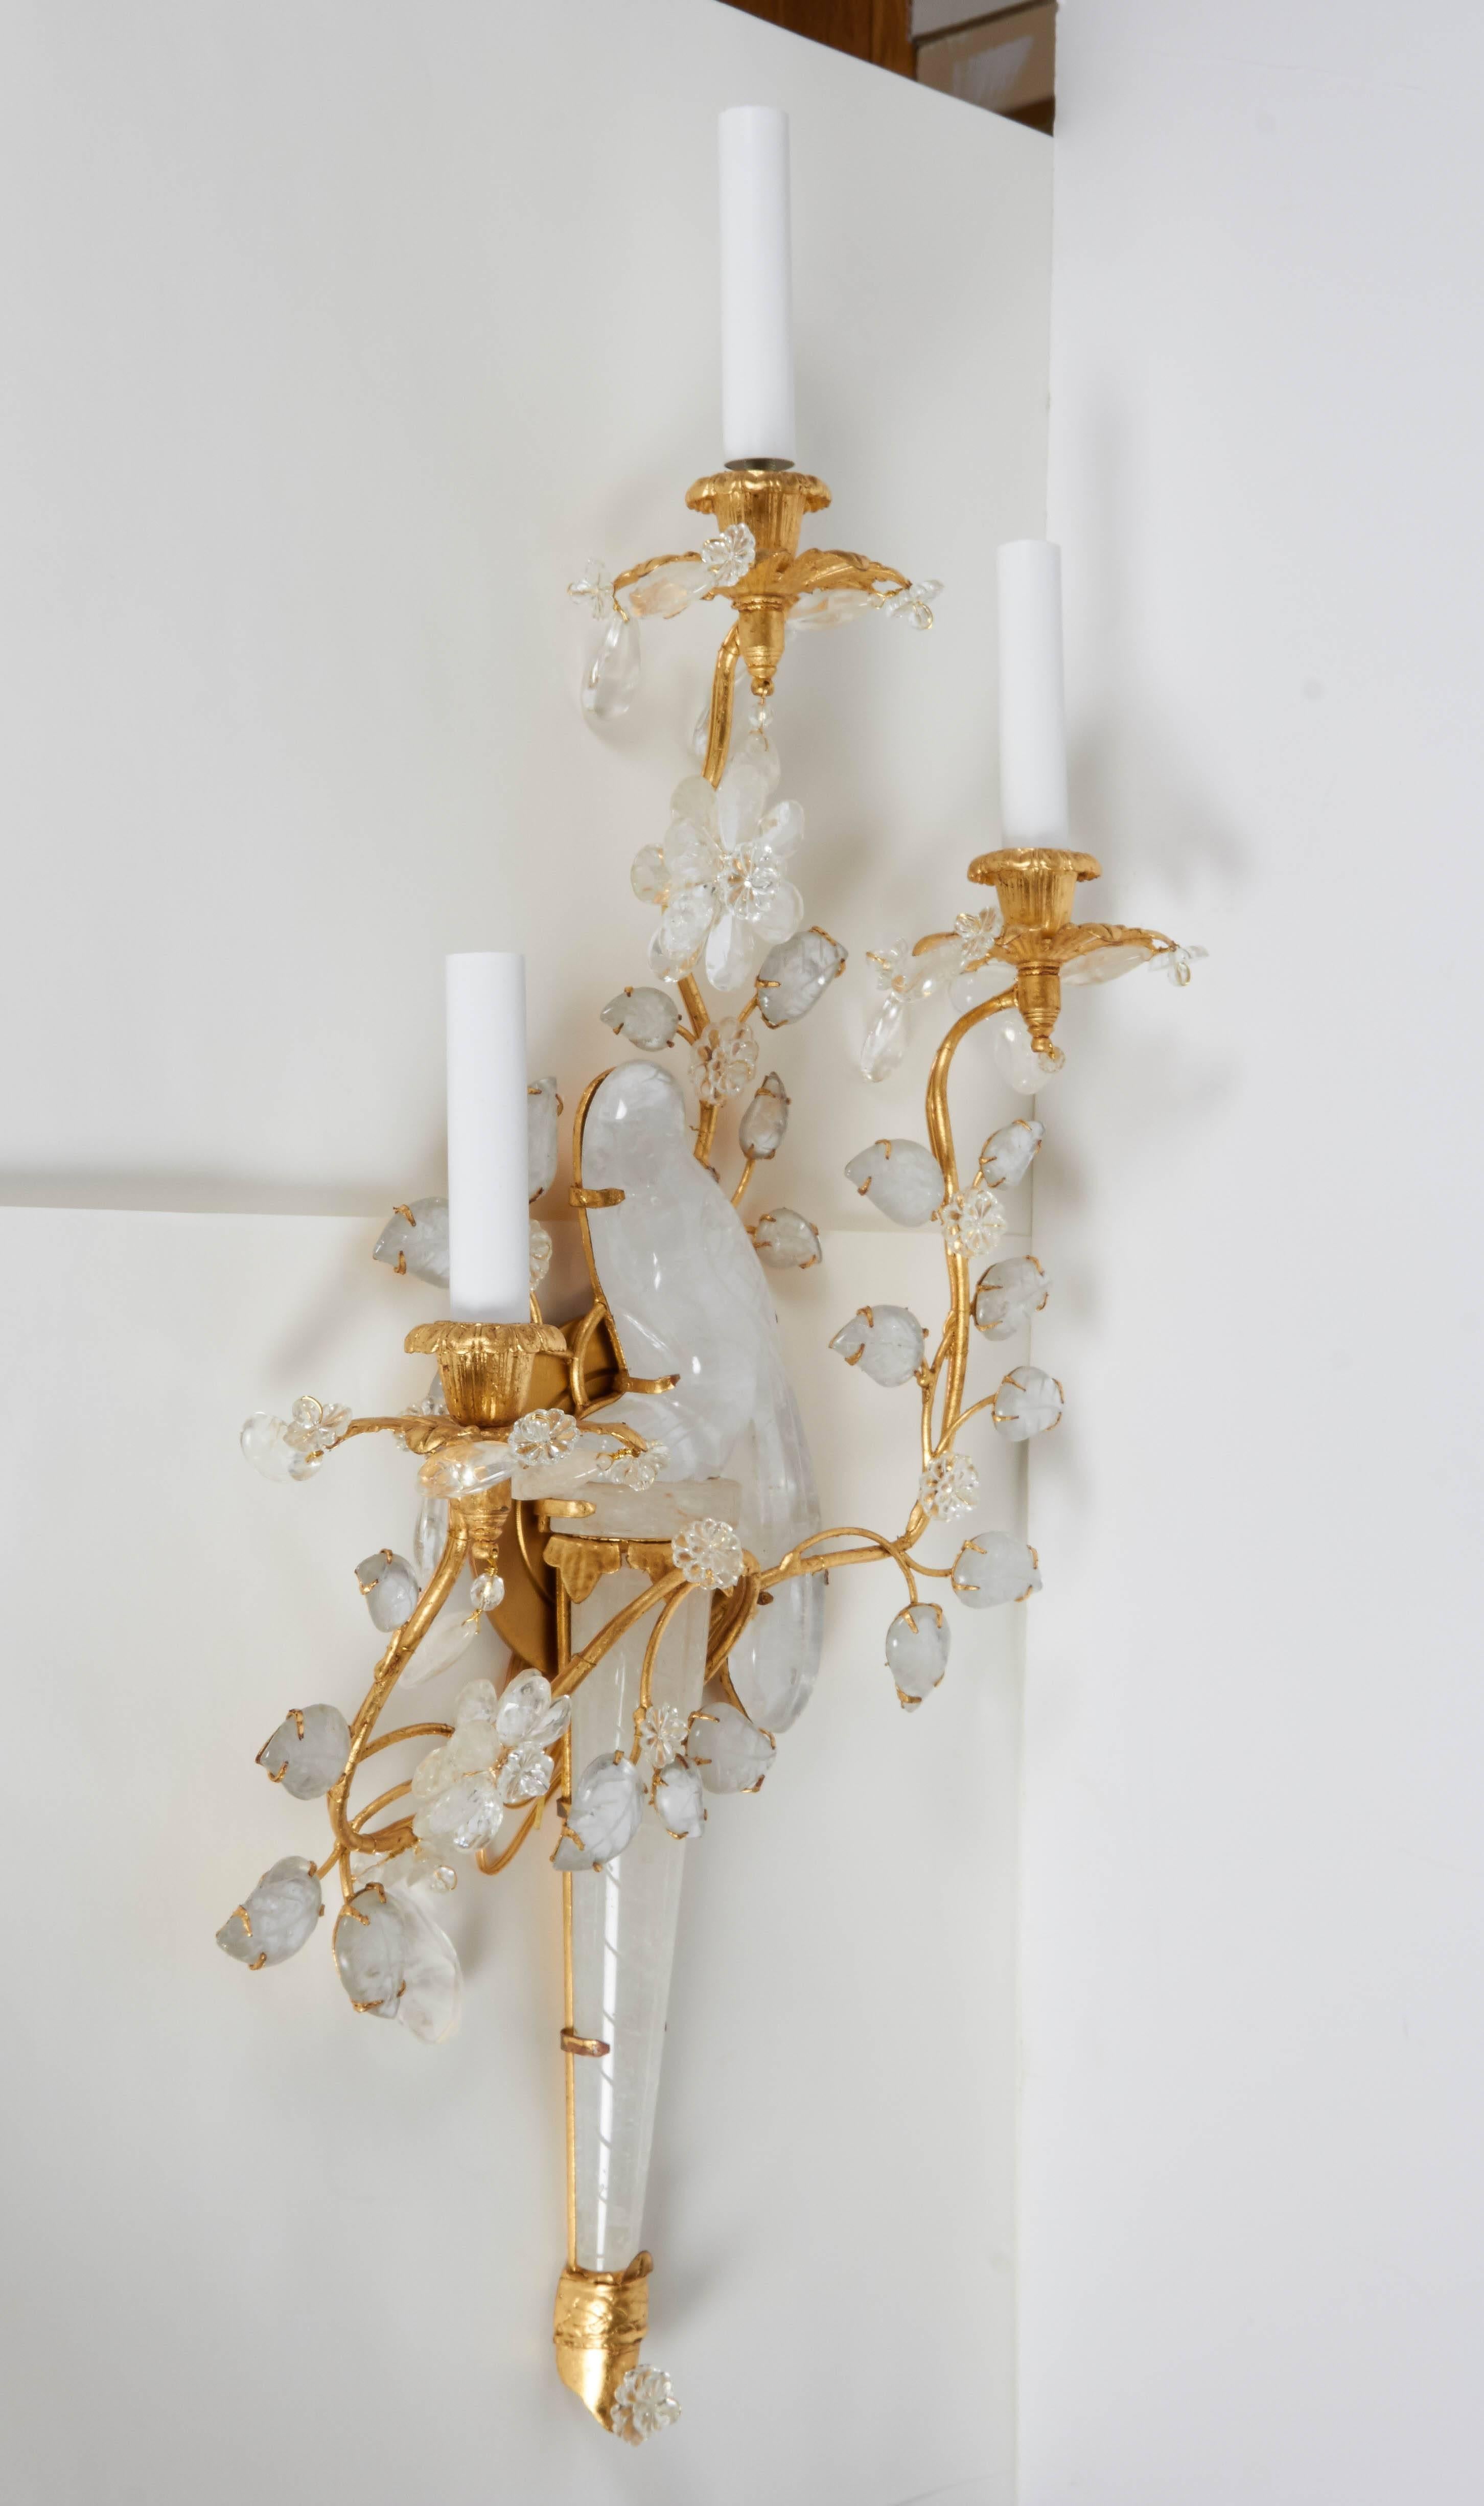 A pair of symmetrical right and left facing three-light gilt metal sconces, design of bird and rock crystal surrounded by sprays of branches and leaves.